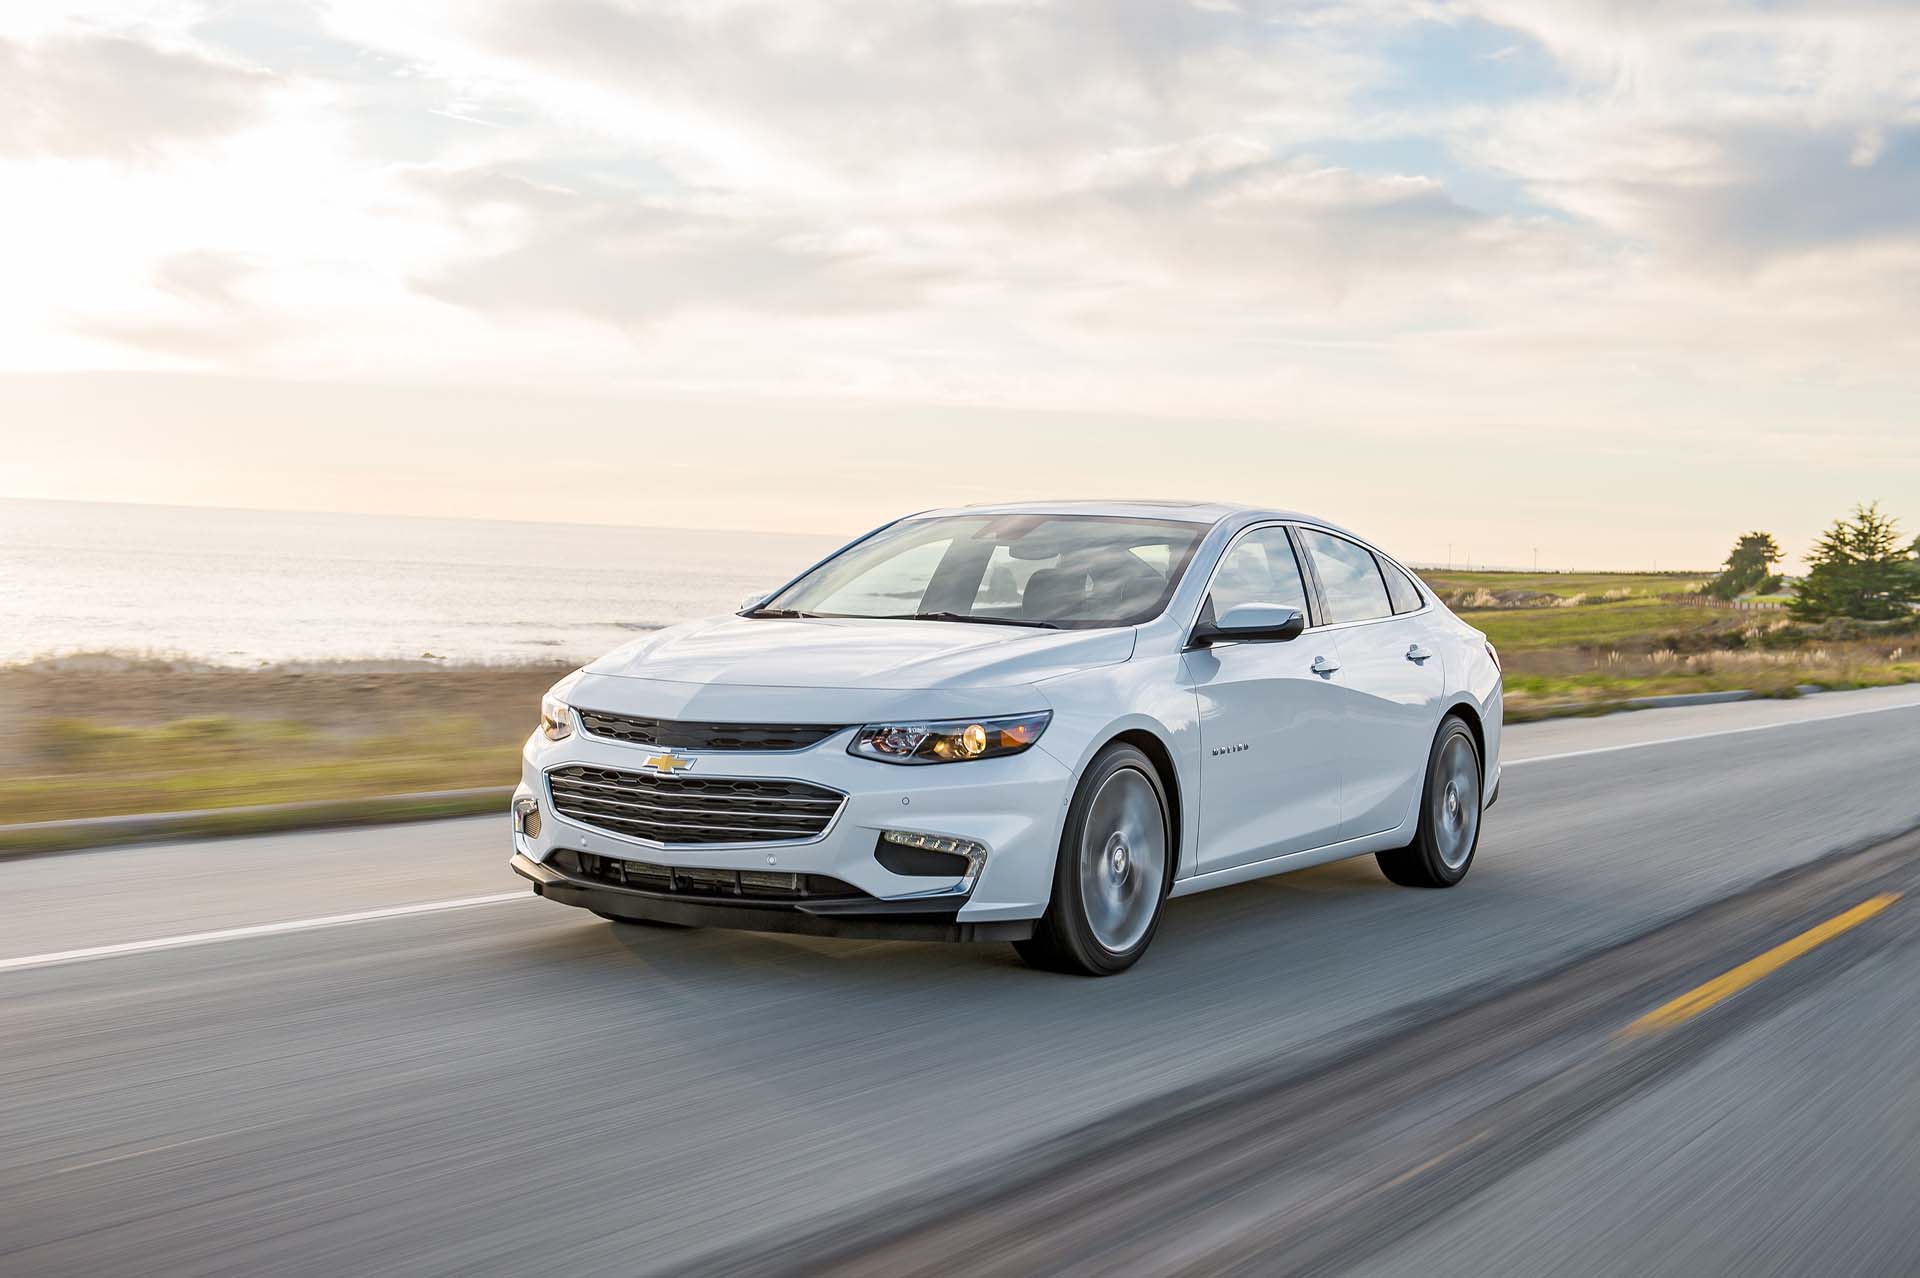 2017 Chevrolet Malibu (Chevy) Review, Ratings, Specs, Prices, and